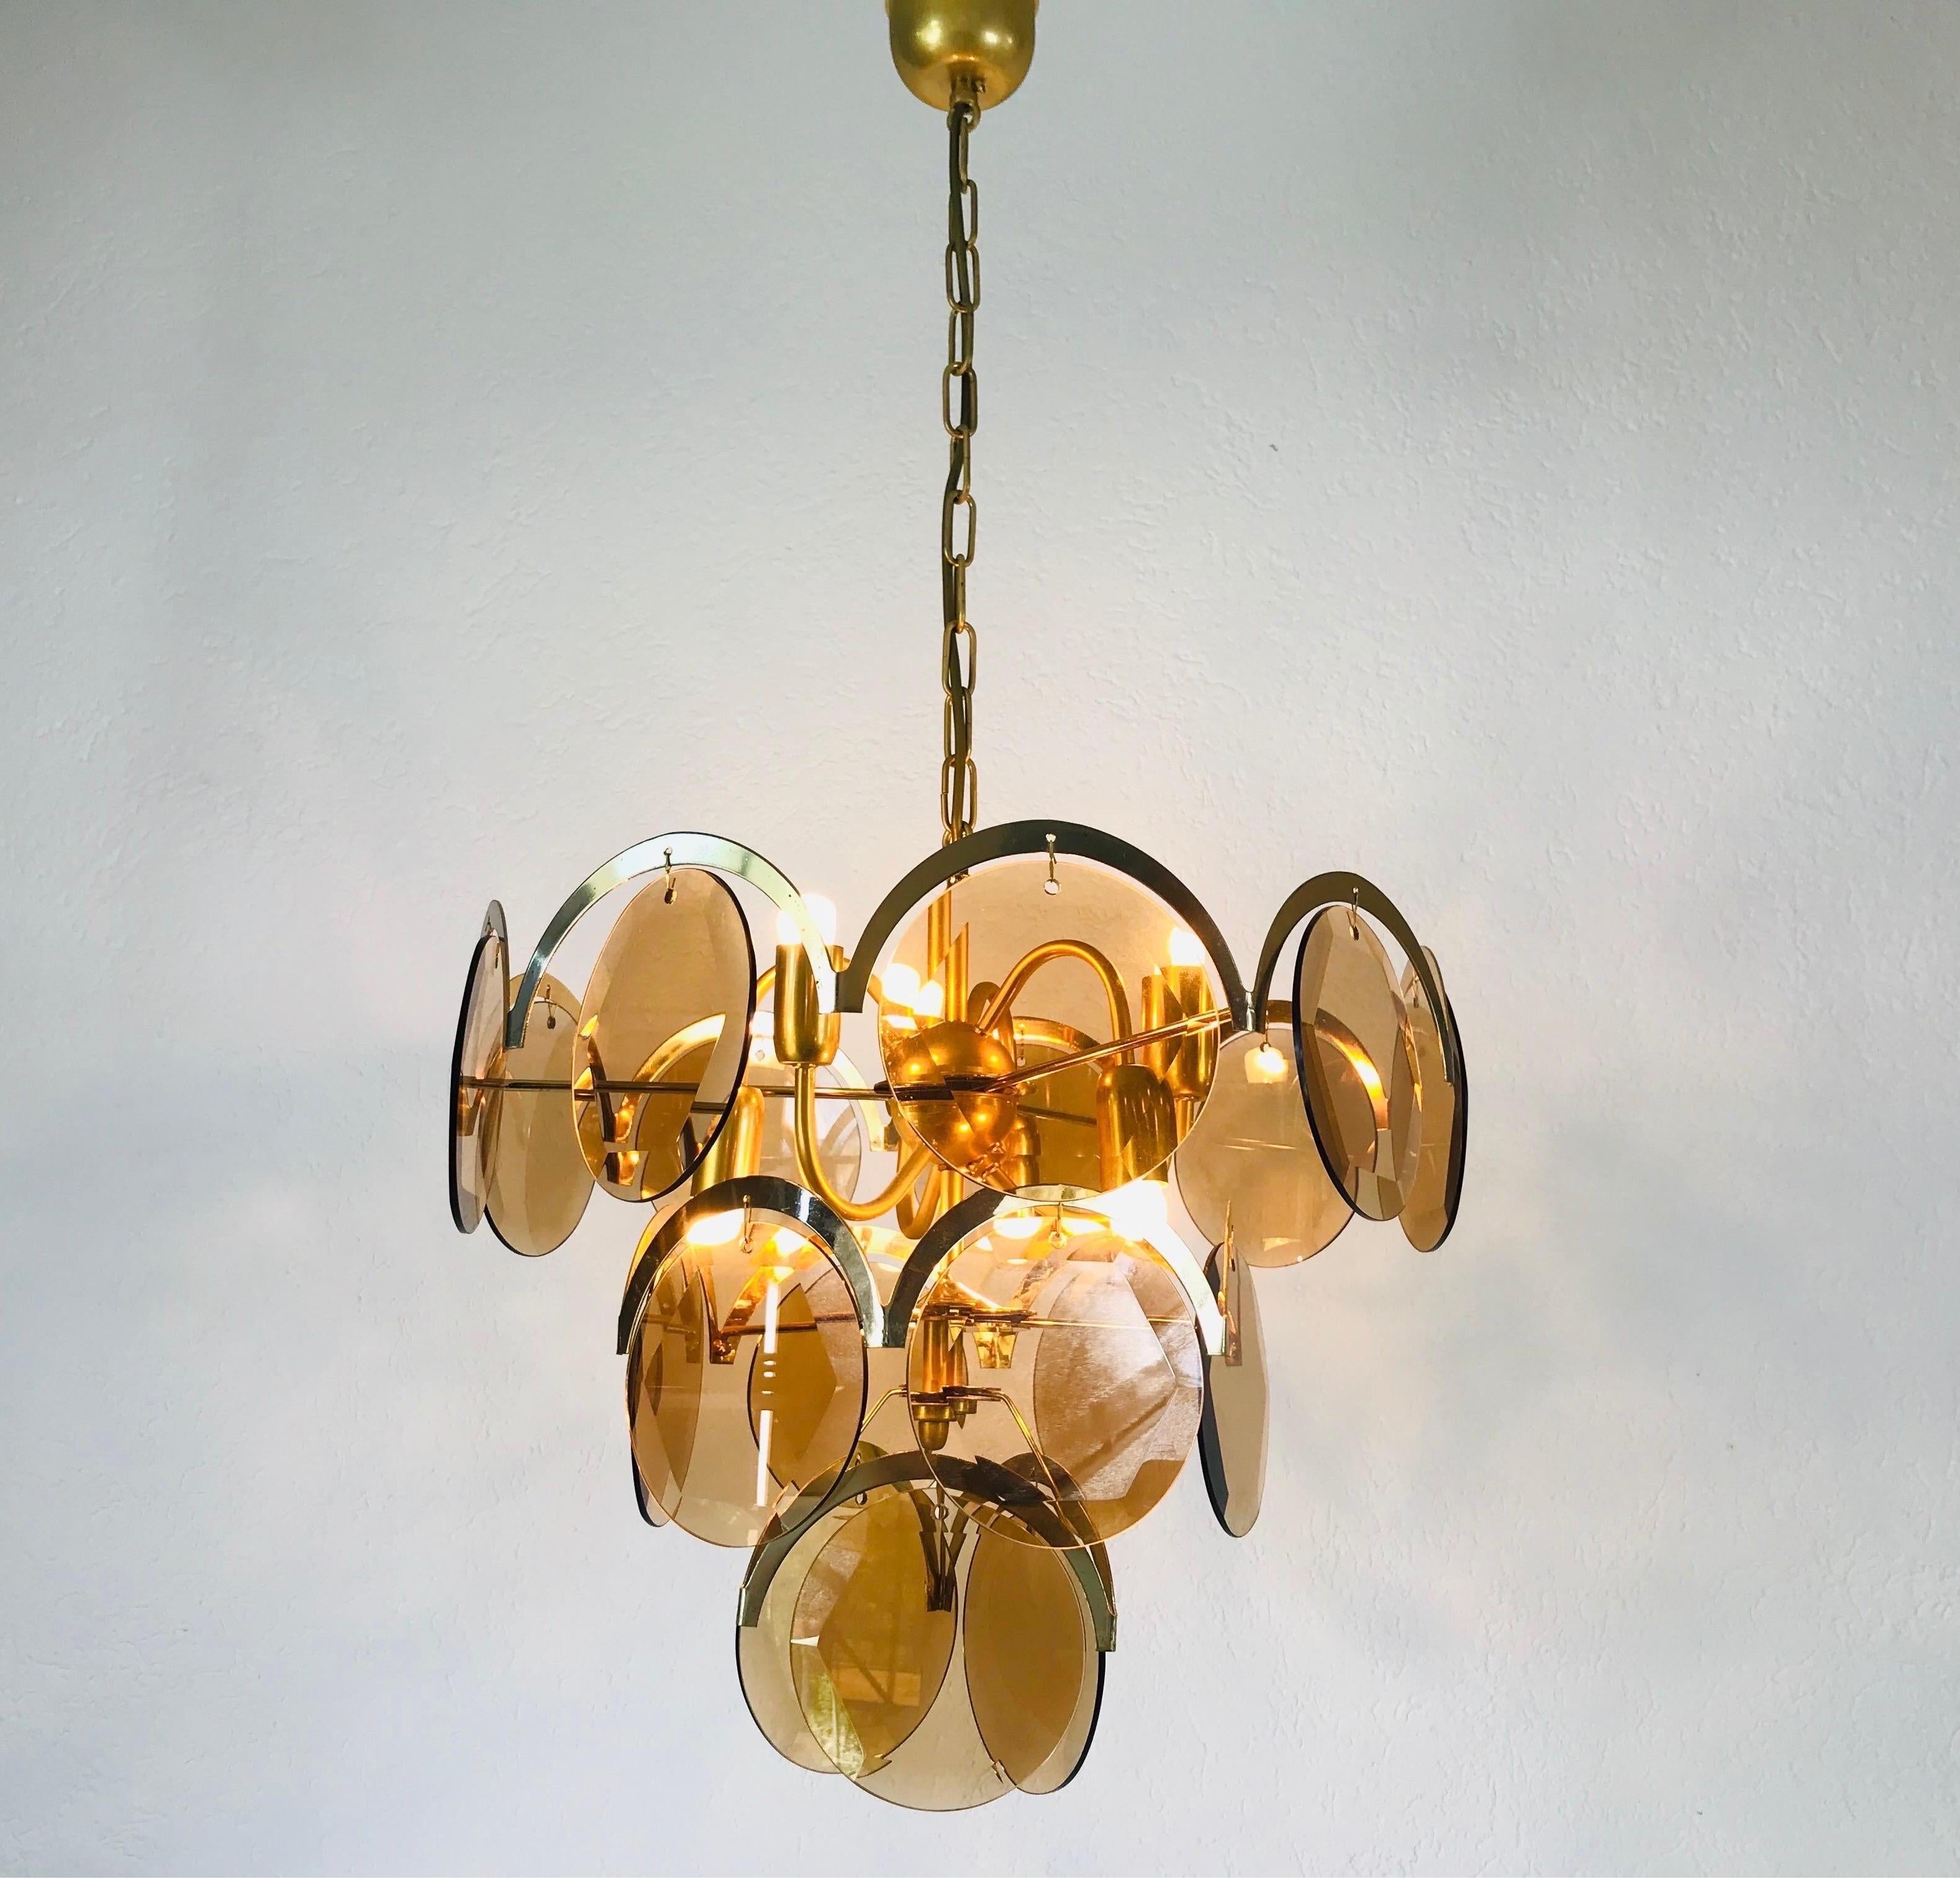 A midcentury chandelier made in Italy in the 1960s. It is fascinating with its colorful glasses and chrome body.

The light requires E14 light bulbs. Very good vintage condition.

Free worldwide express shipping.